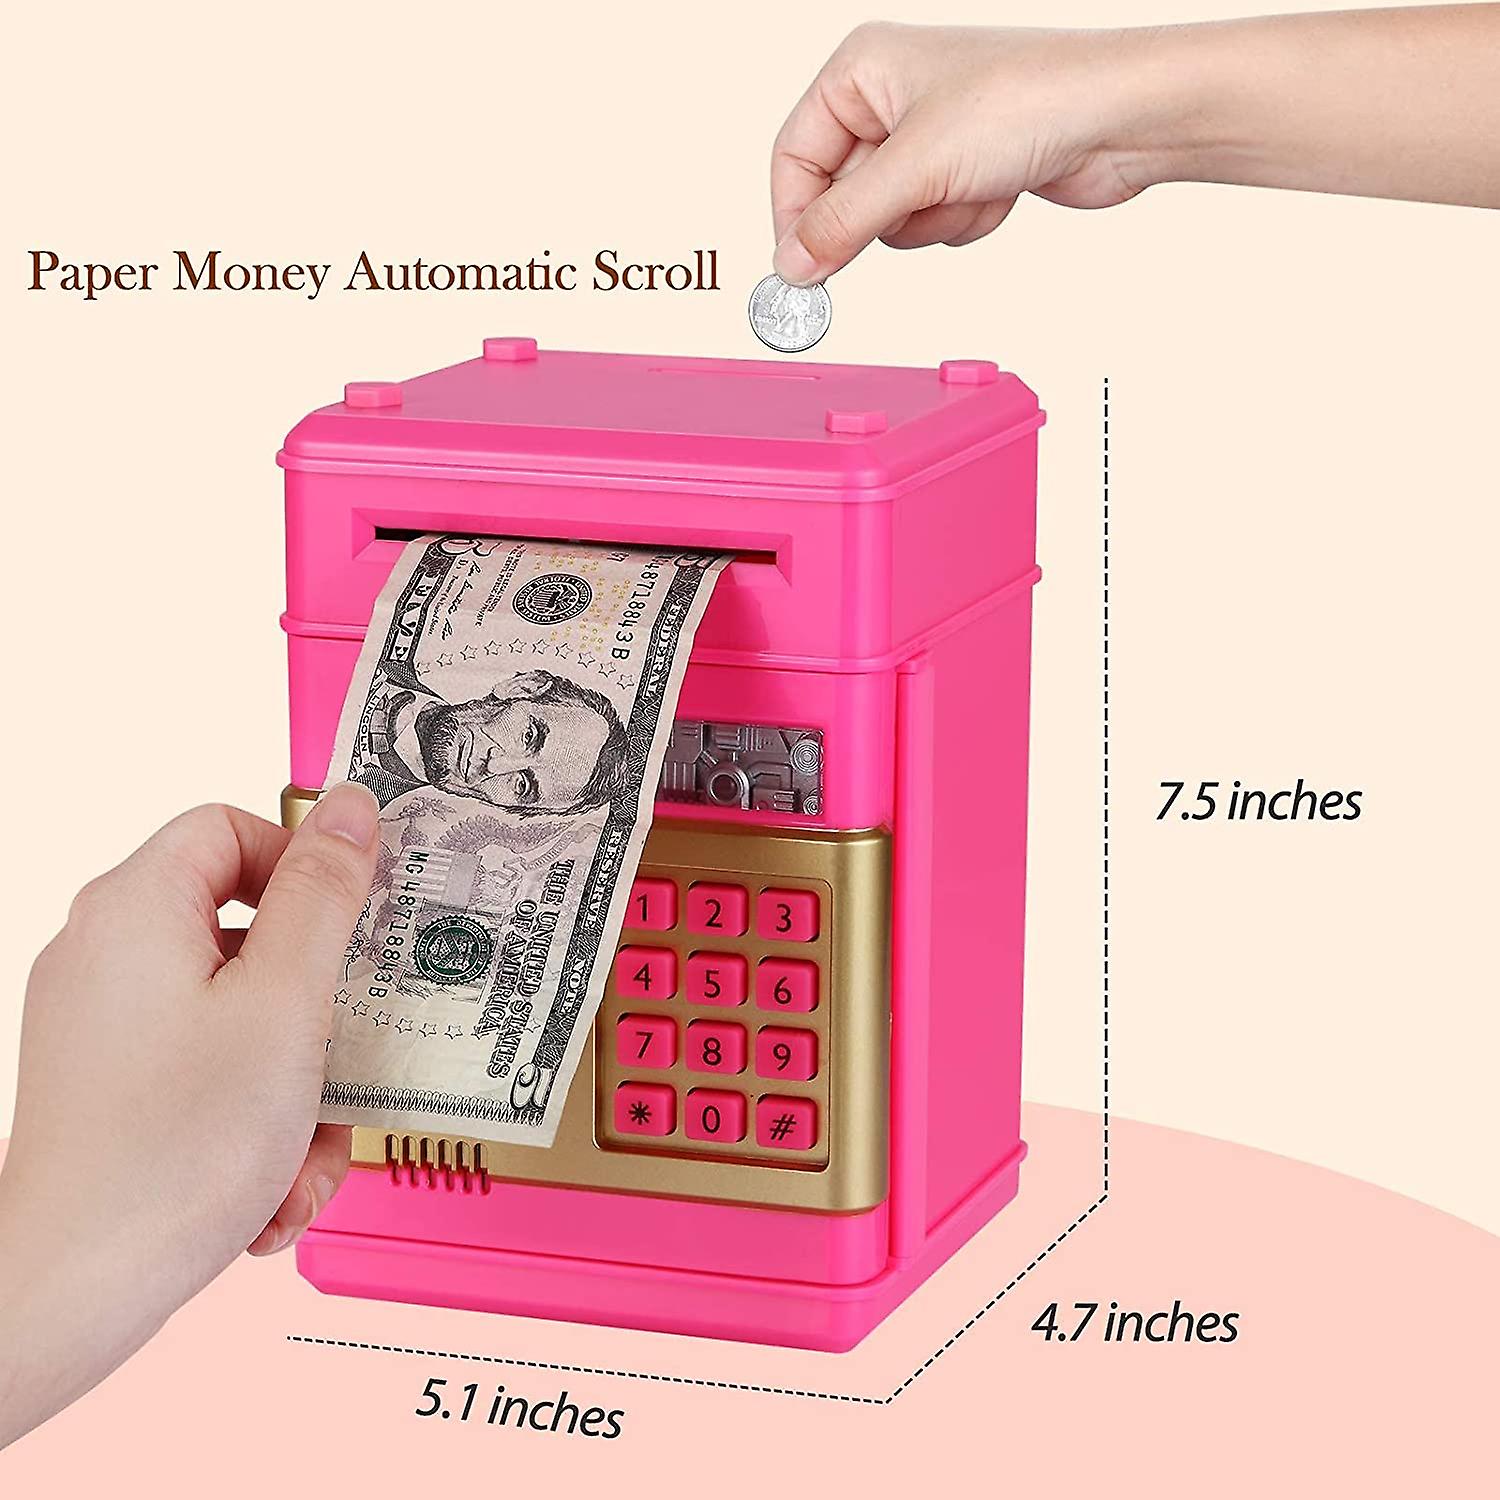 Piggy Bank For Boys Girls， Large Electronic Real Money Coin Bank With Safe Password Lock， Auto Scroll Paper Money Plastic Saving Box Toy， Gift For Kid